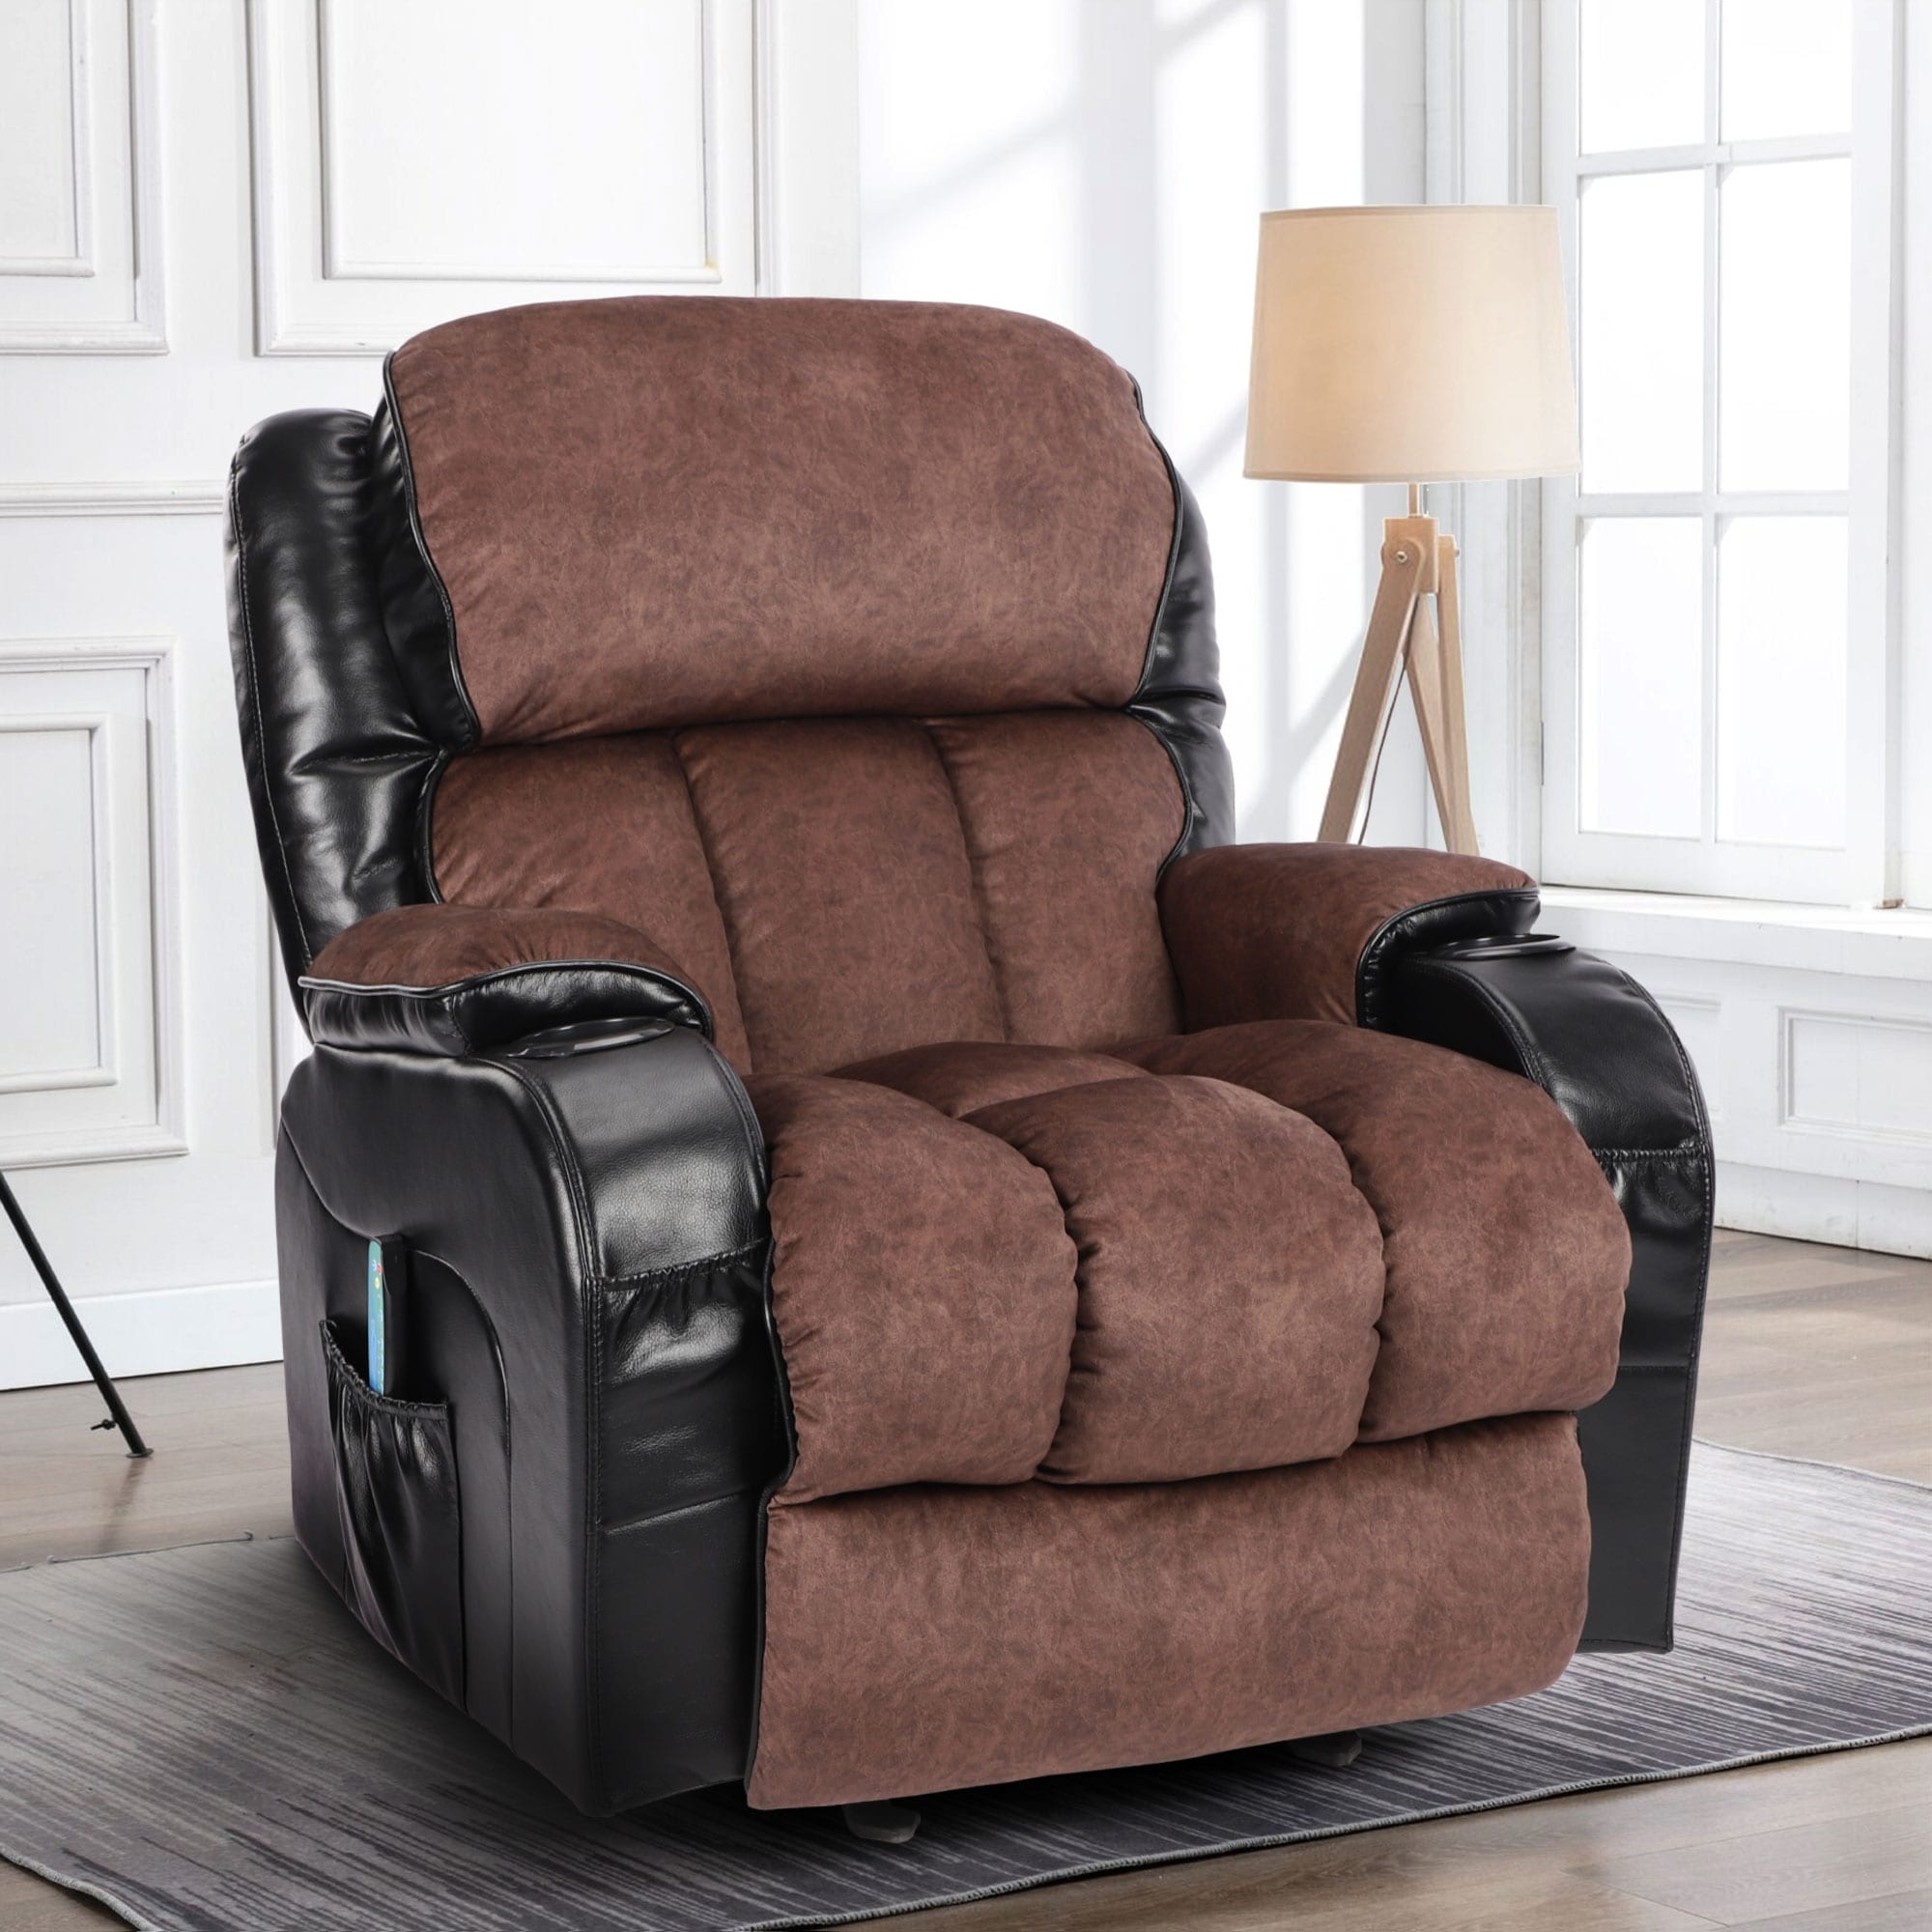 https://ak1.ostkcdn.com/images/products/is/images/direct/6ad7dfc4e7bc3c57c370bde63fa08ff184236b6b/Black-Brown-Faux-Leather-Recliner-Chair-with-Adjustable-Heating-Massage%2C-Rocking-Function%2C-Side-Pockets%2C-and-Cup-Holders.jpg